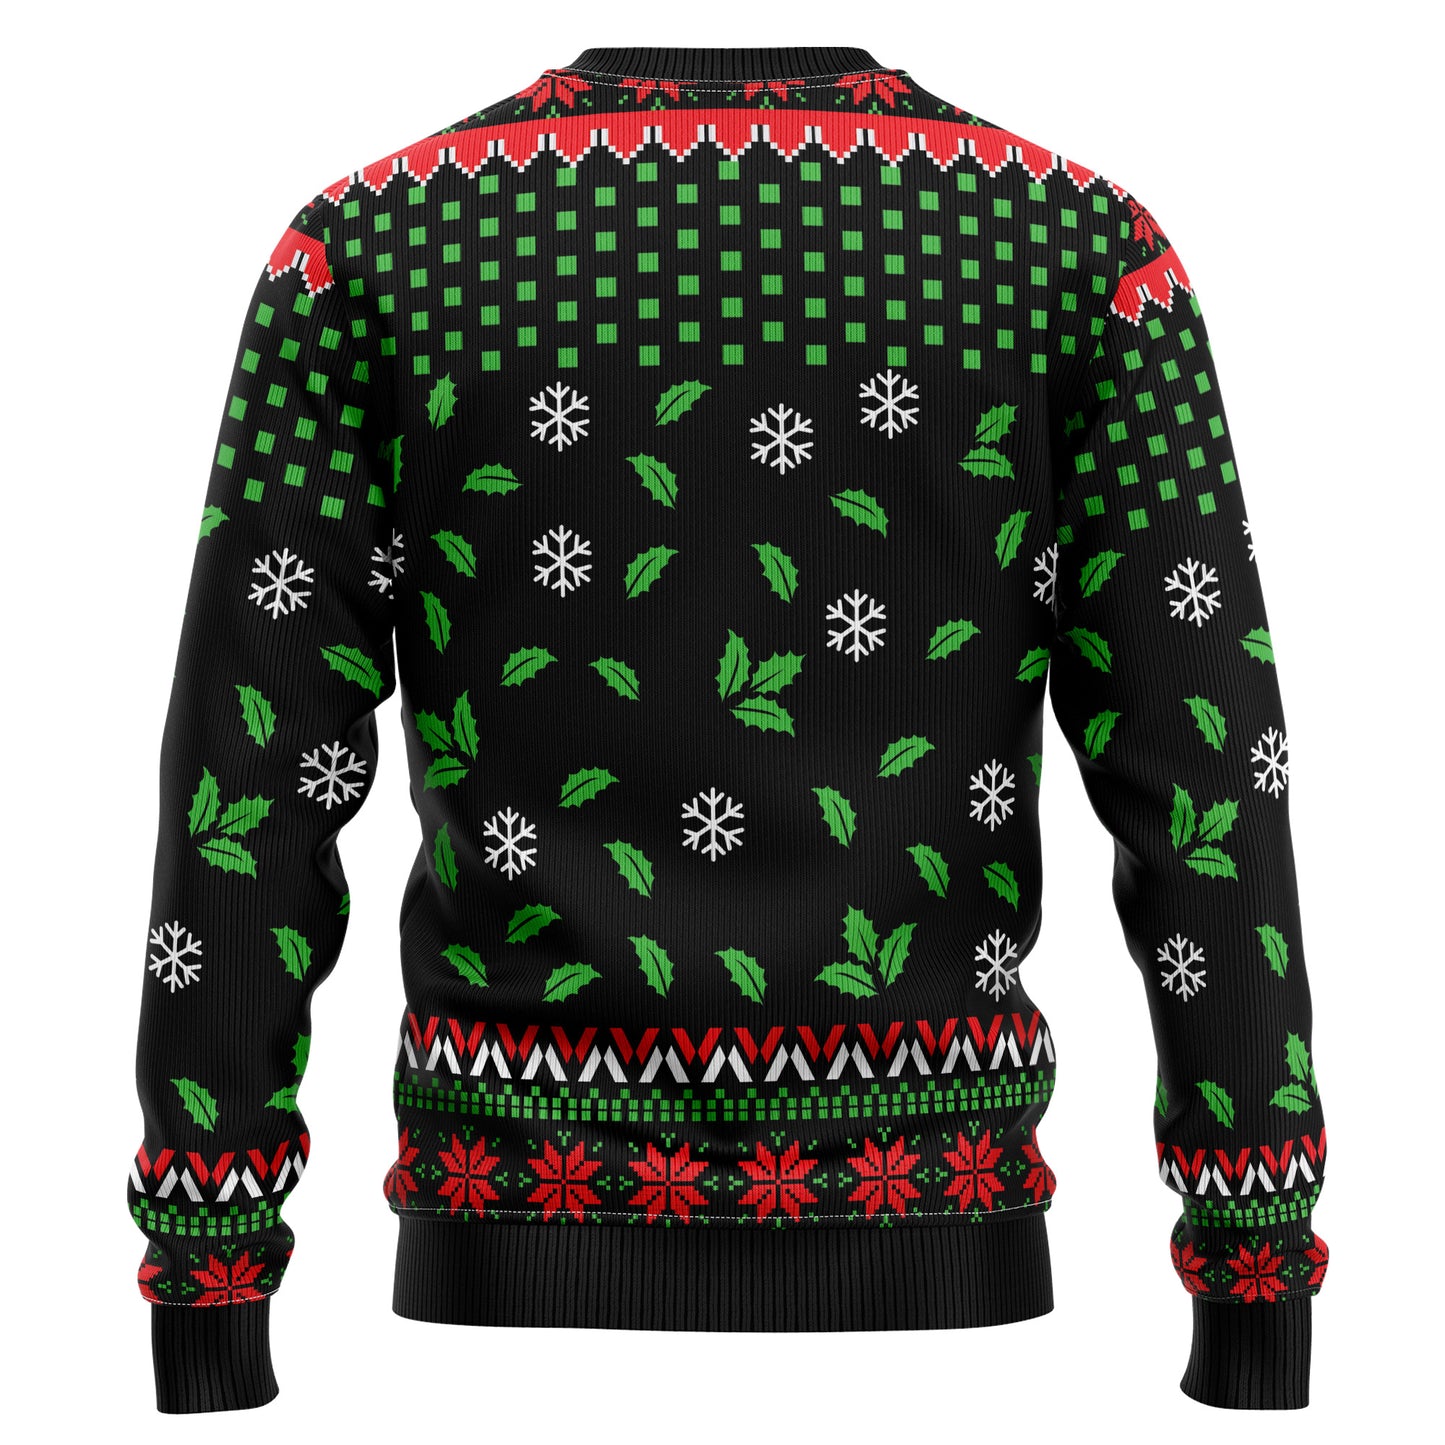 Funny Silent Butt Deadly Santa HT101223 Ugly Christmas Sweater